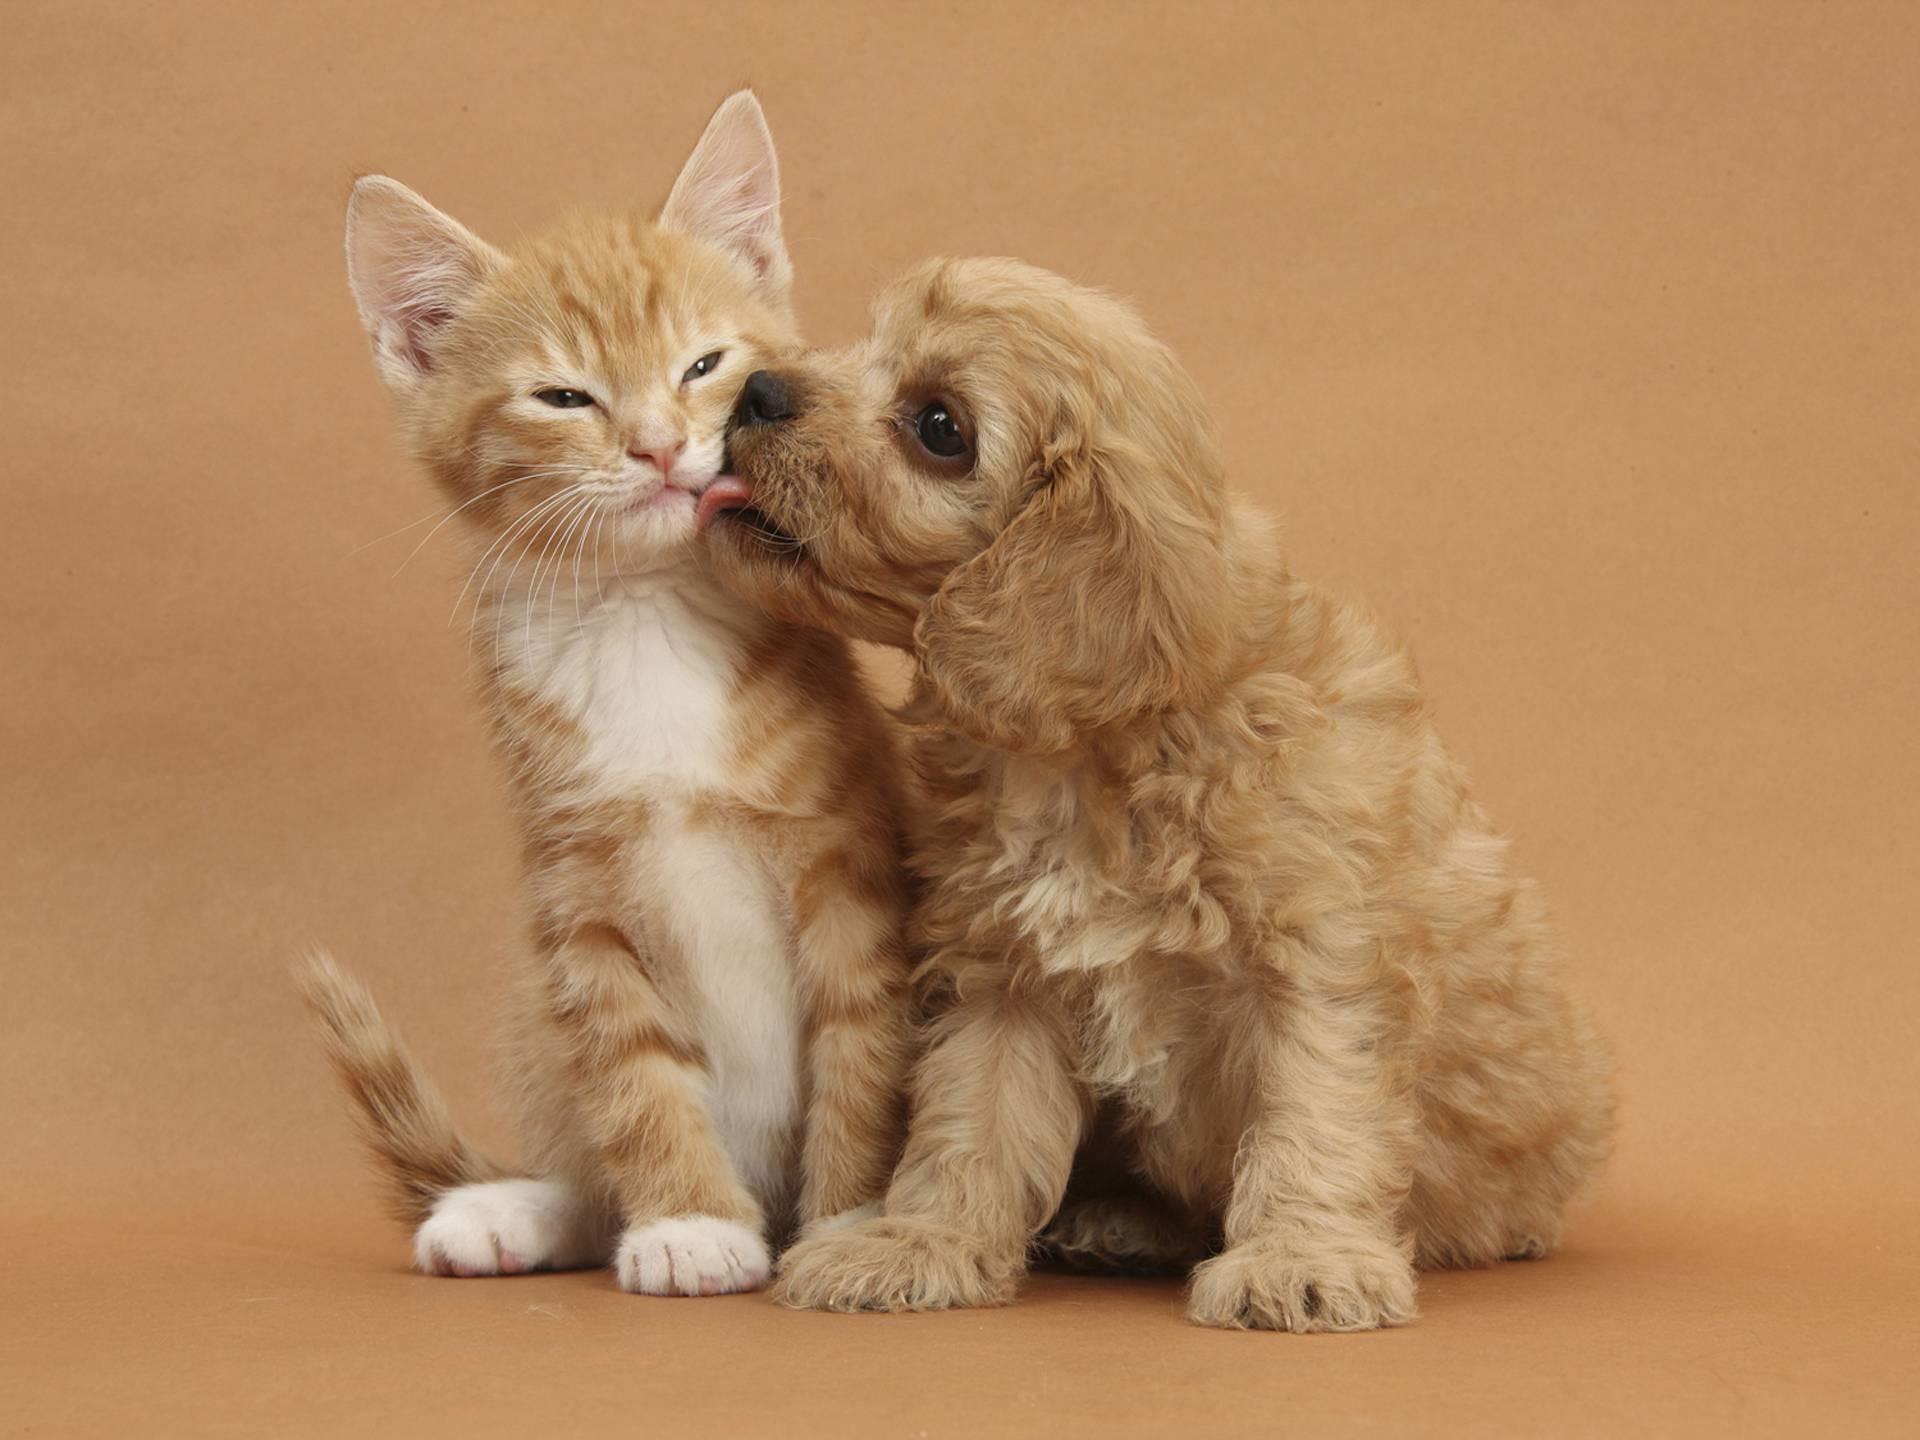 Cute dog and cat – Dogs Wallpaper